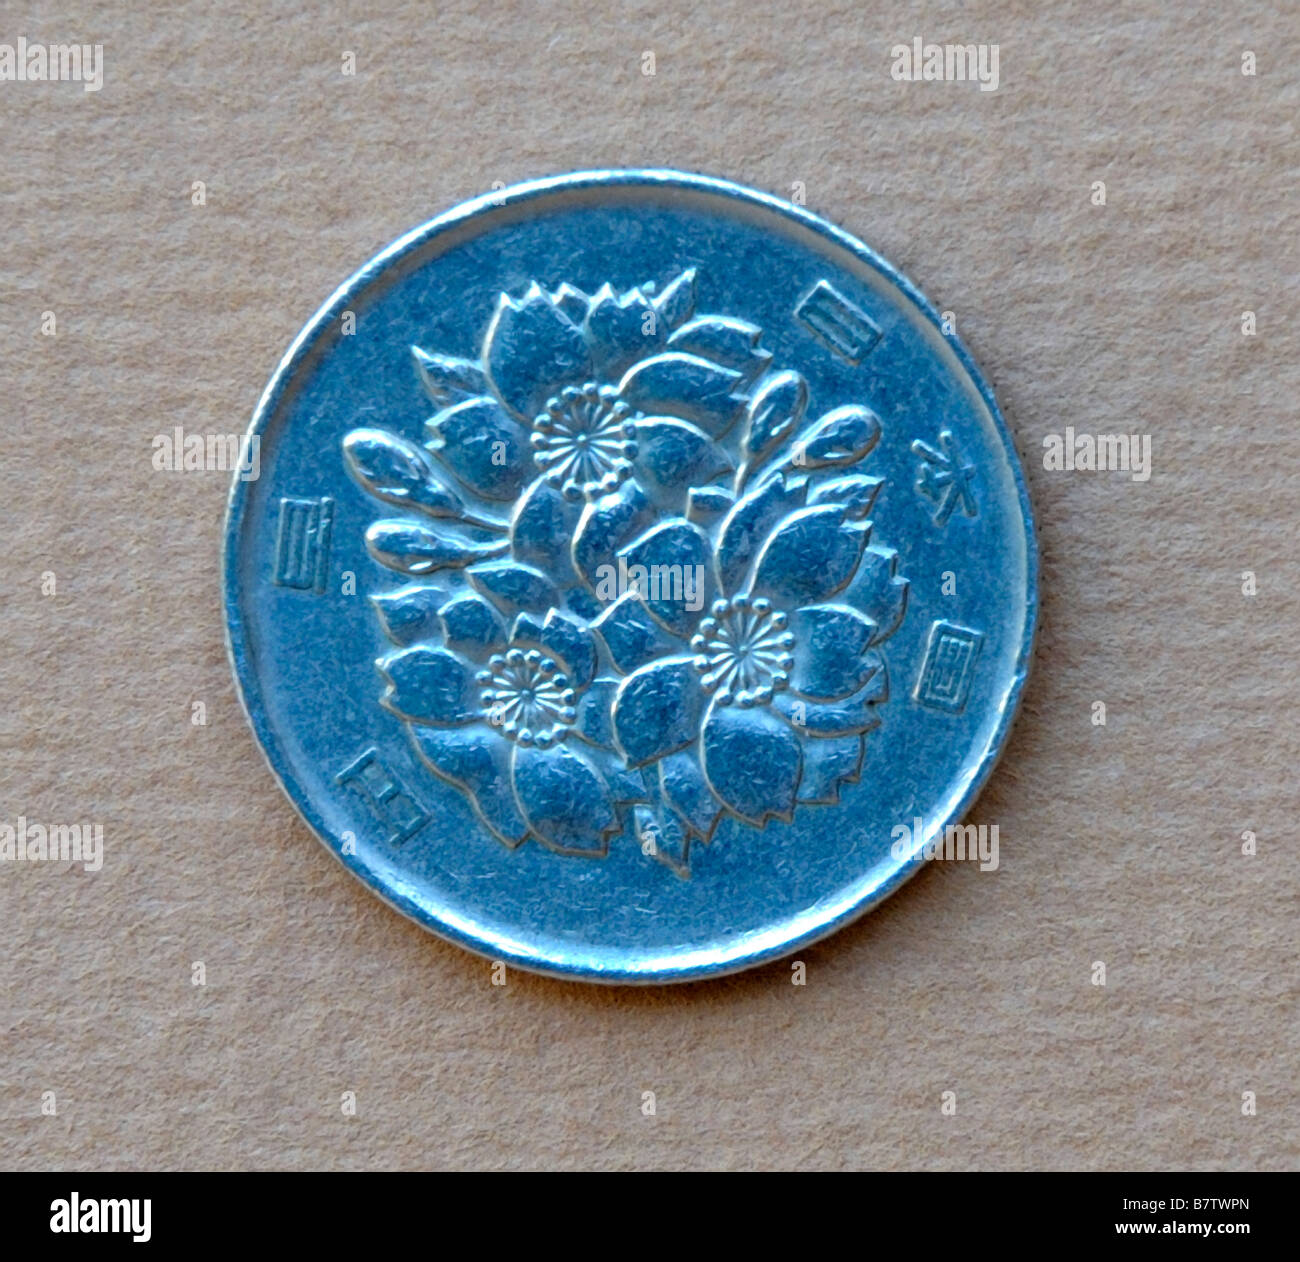 China 100 One Hundred Fen Coin Stock Photo